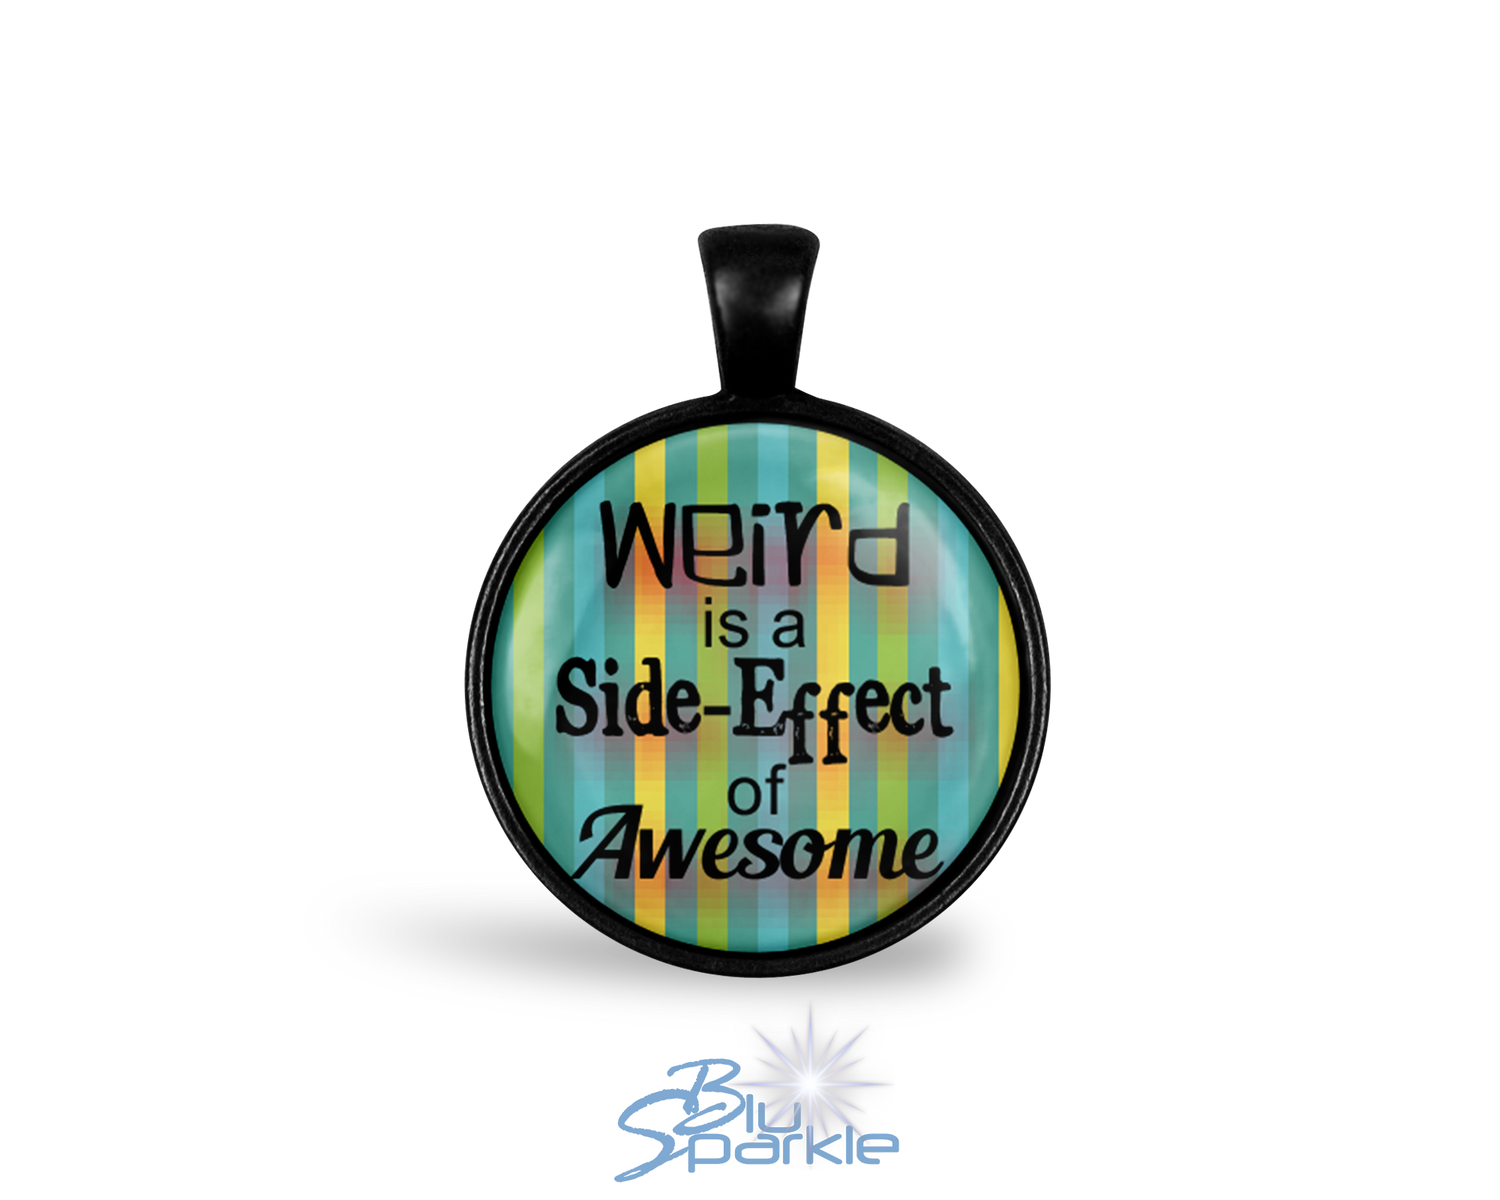 Black "Weird is a Side-Effect of Awesome" Round Pendants